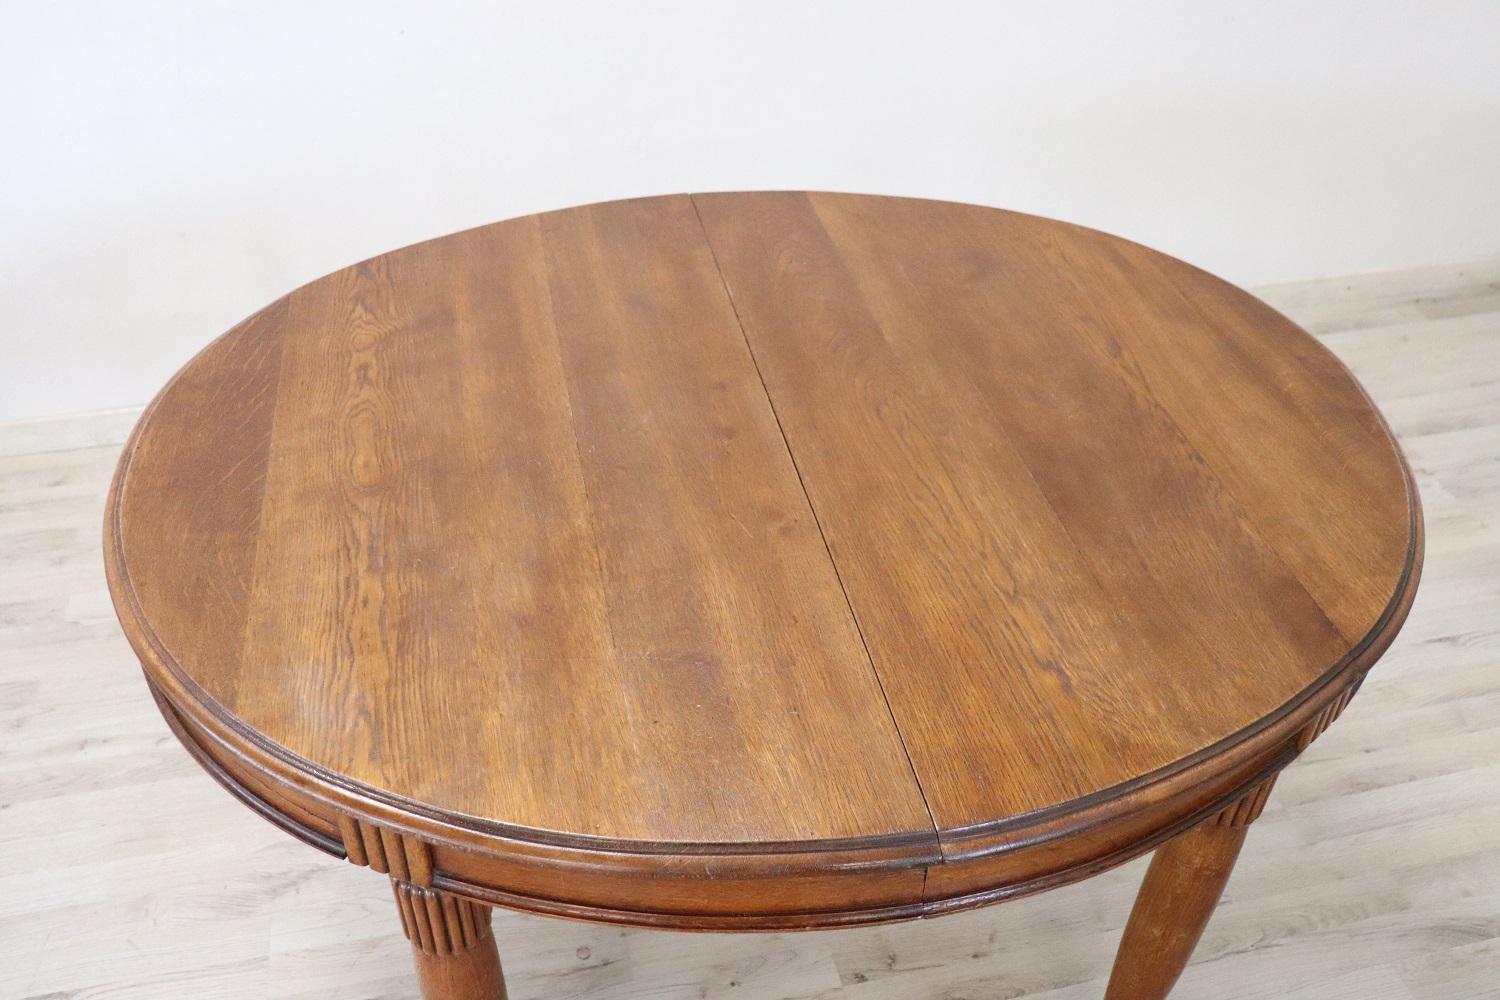 Beautiful important oval dining room table, 1930s in solid oak wood. This table is perfect for a dining room, it extends into the center becoming a large table that can accommodate many people. The four legs are in solid oak wood. The length of the